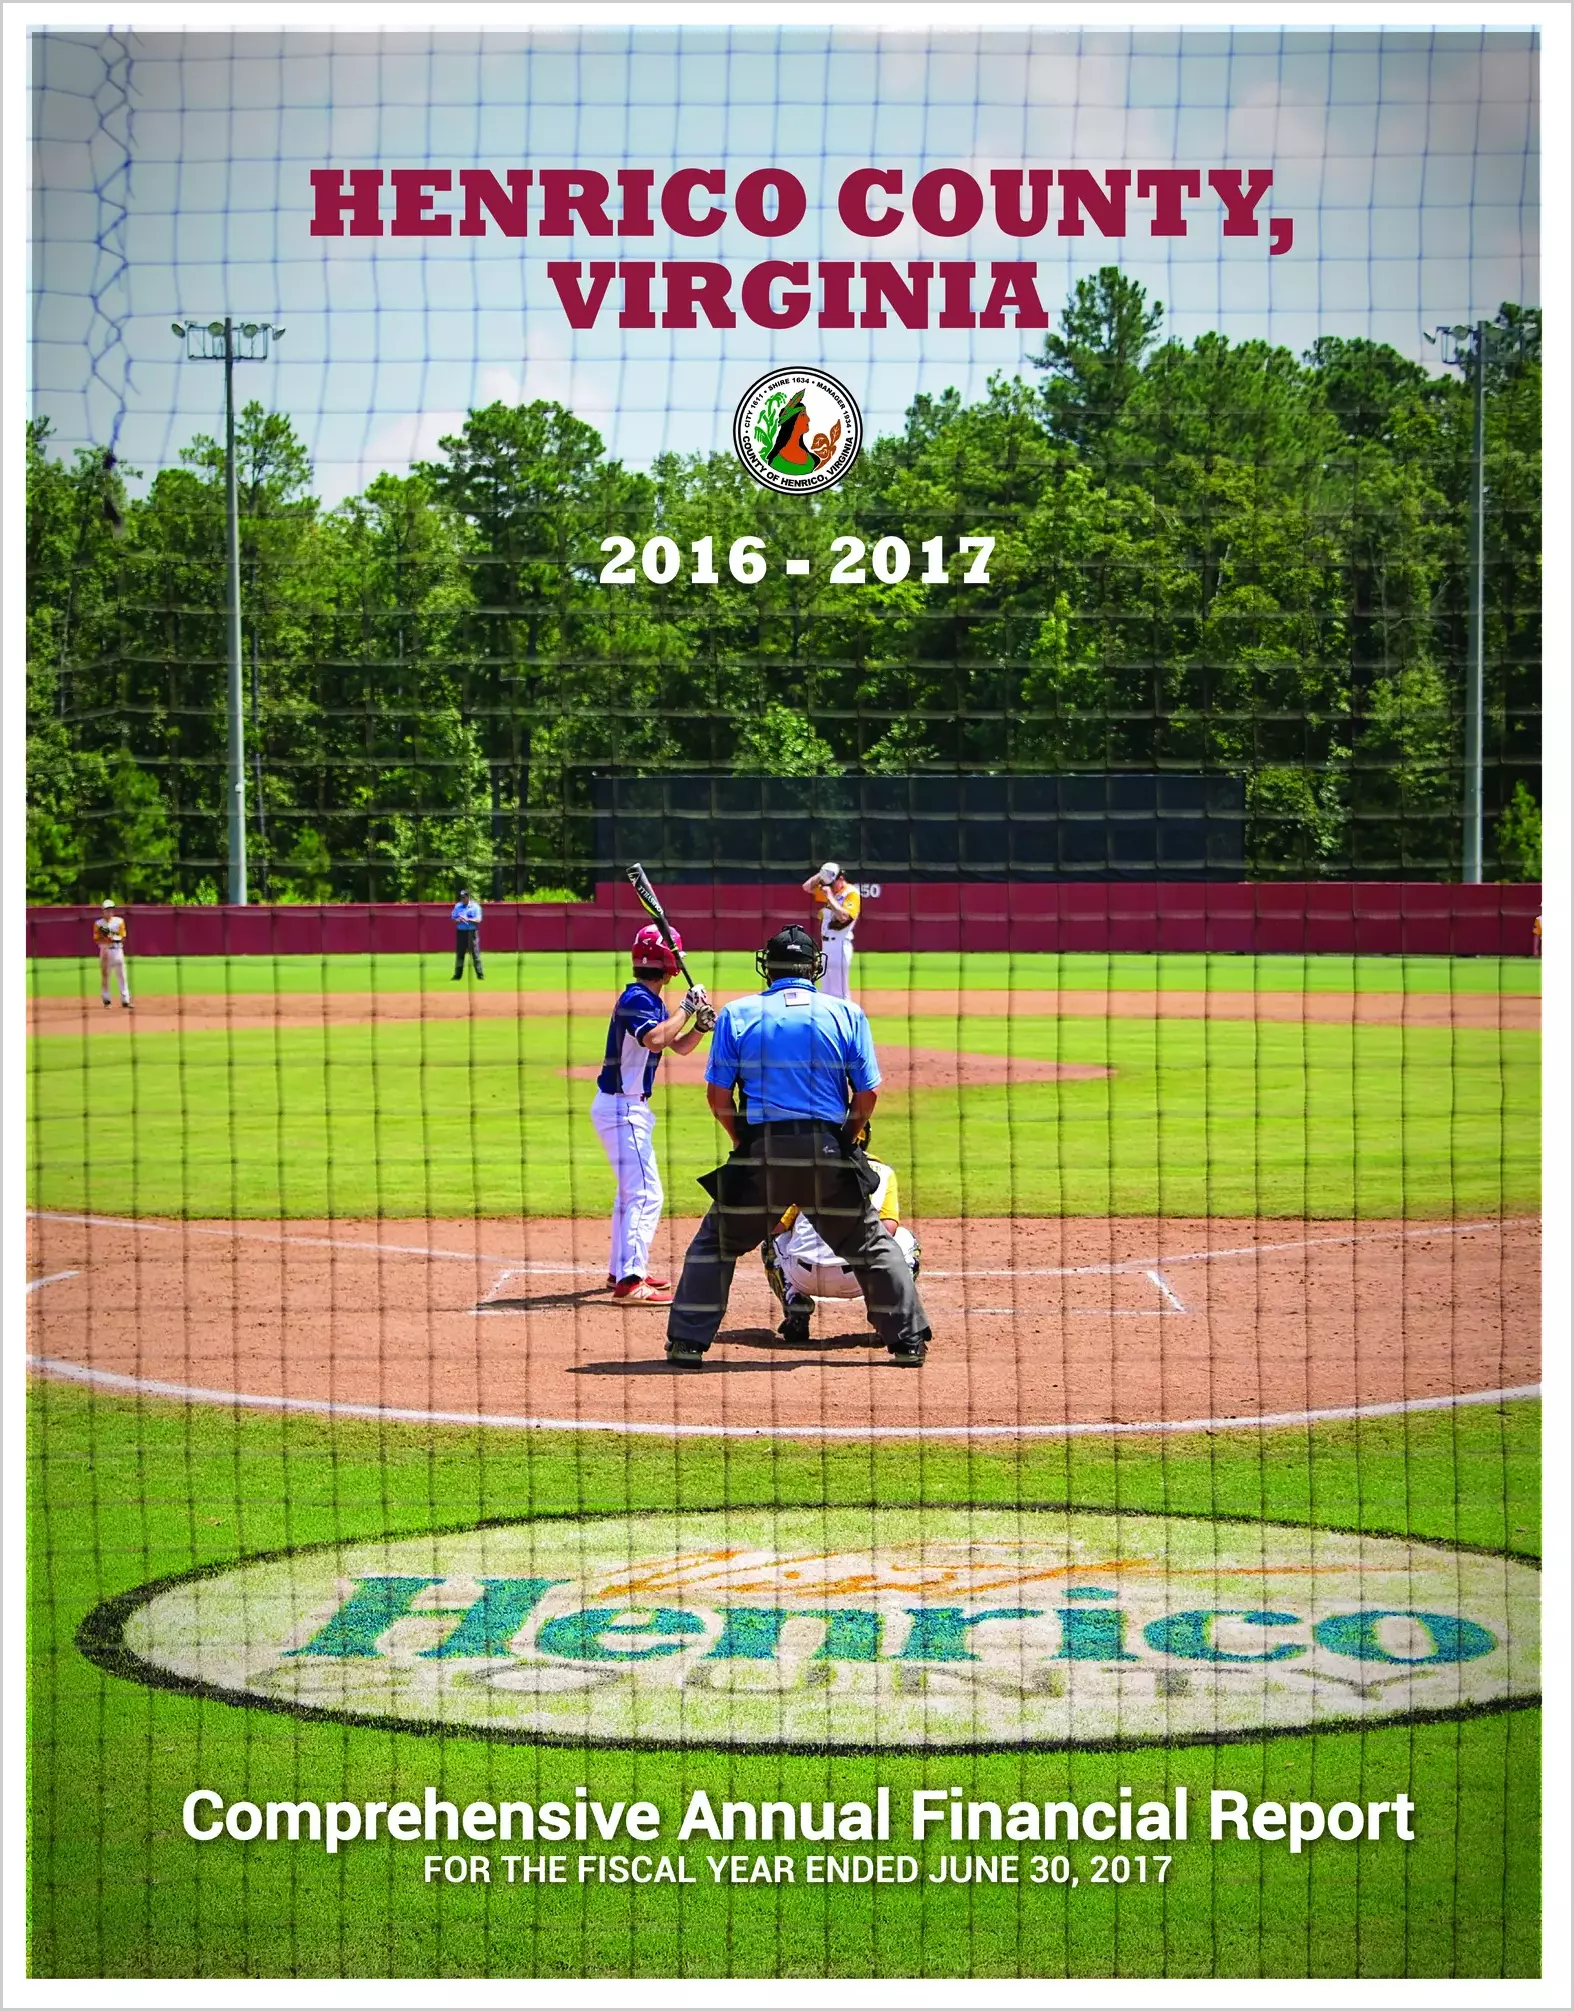 2017 Annual Financial Report for County of Henrico